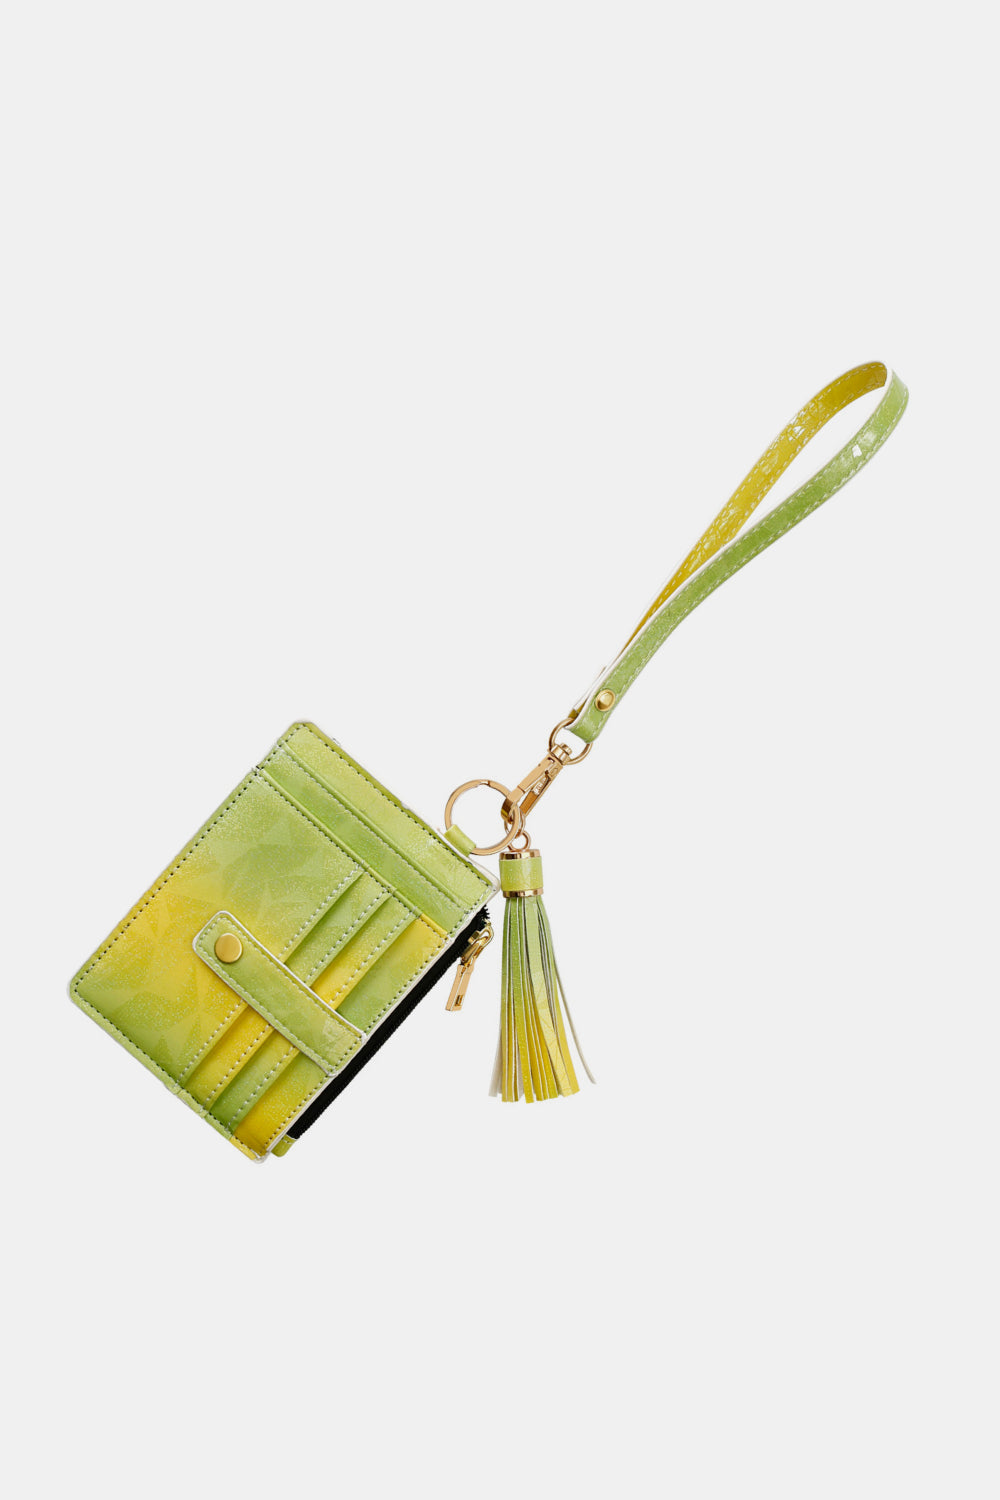 Trendsi Cupid Beauty Supplies Keychains Printed Tassel Keychain with Wallet